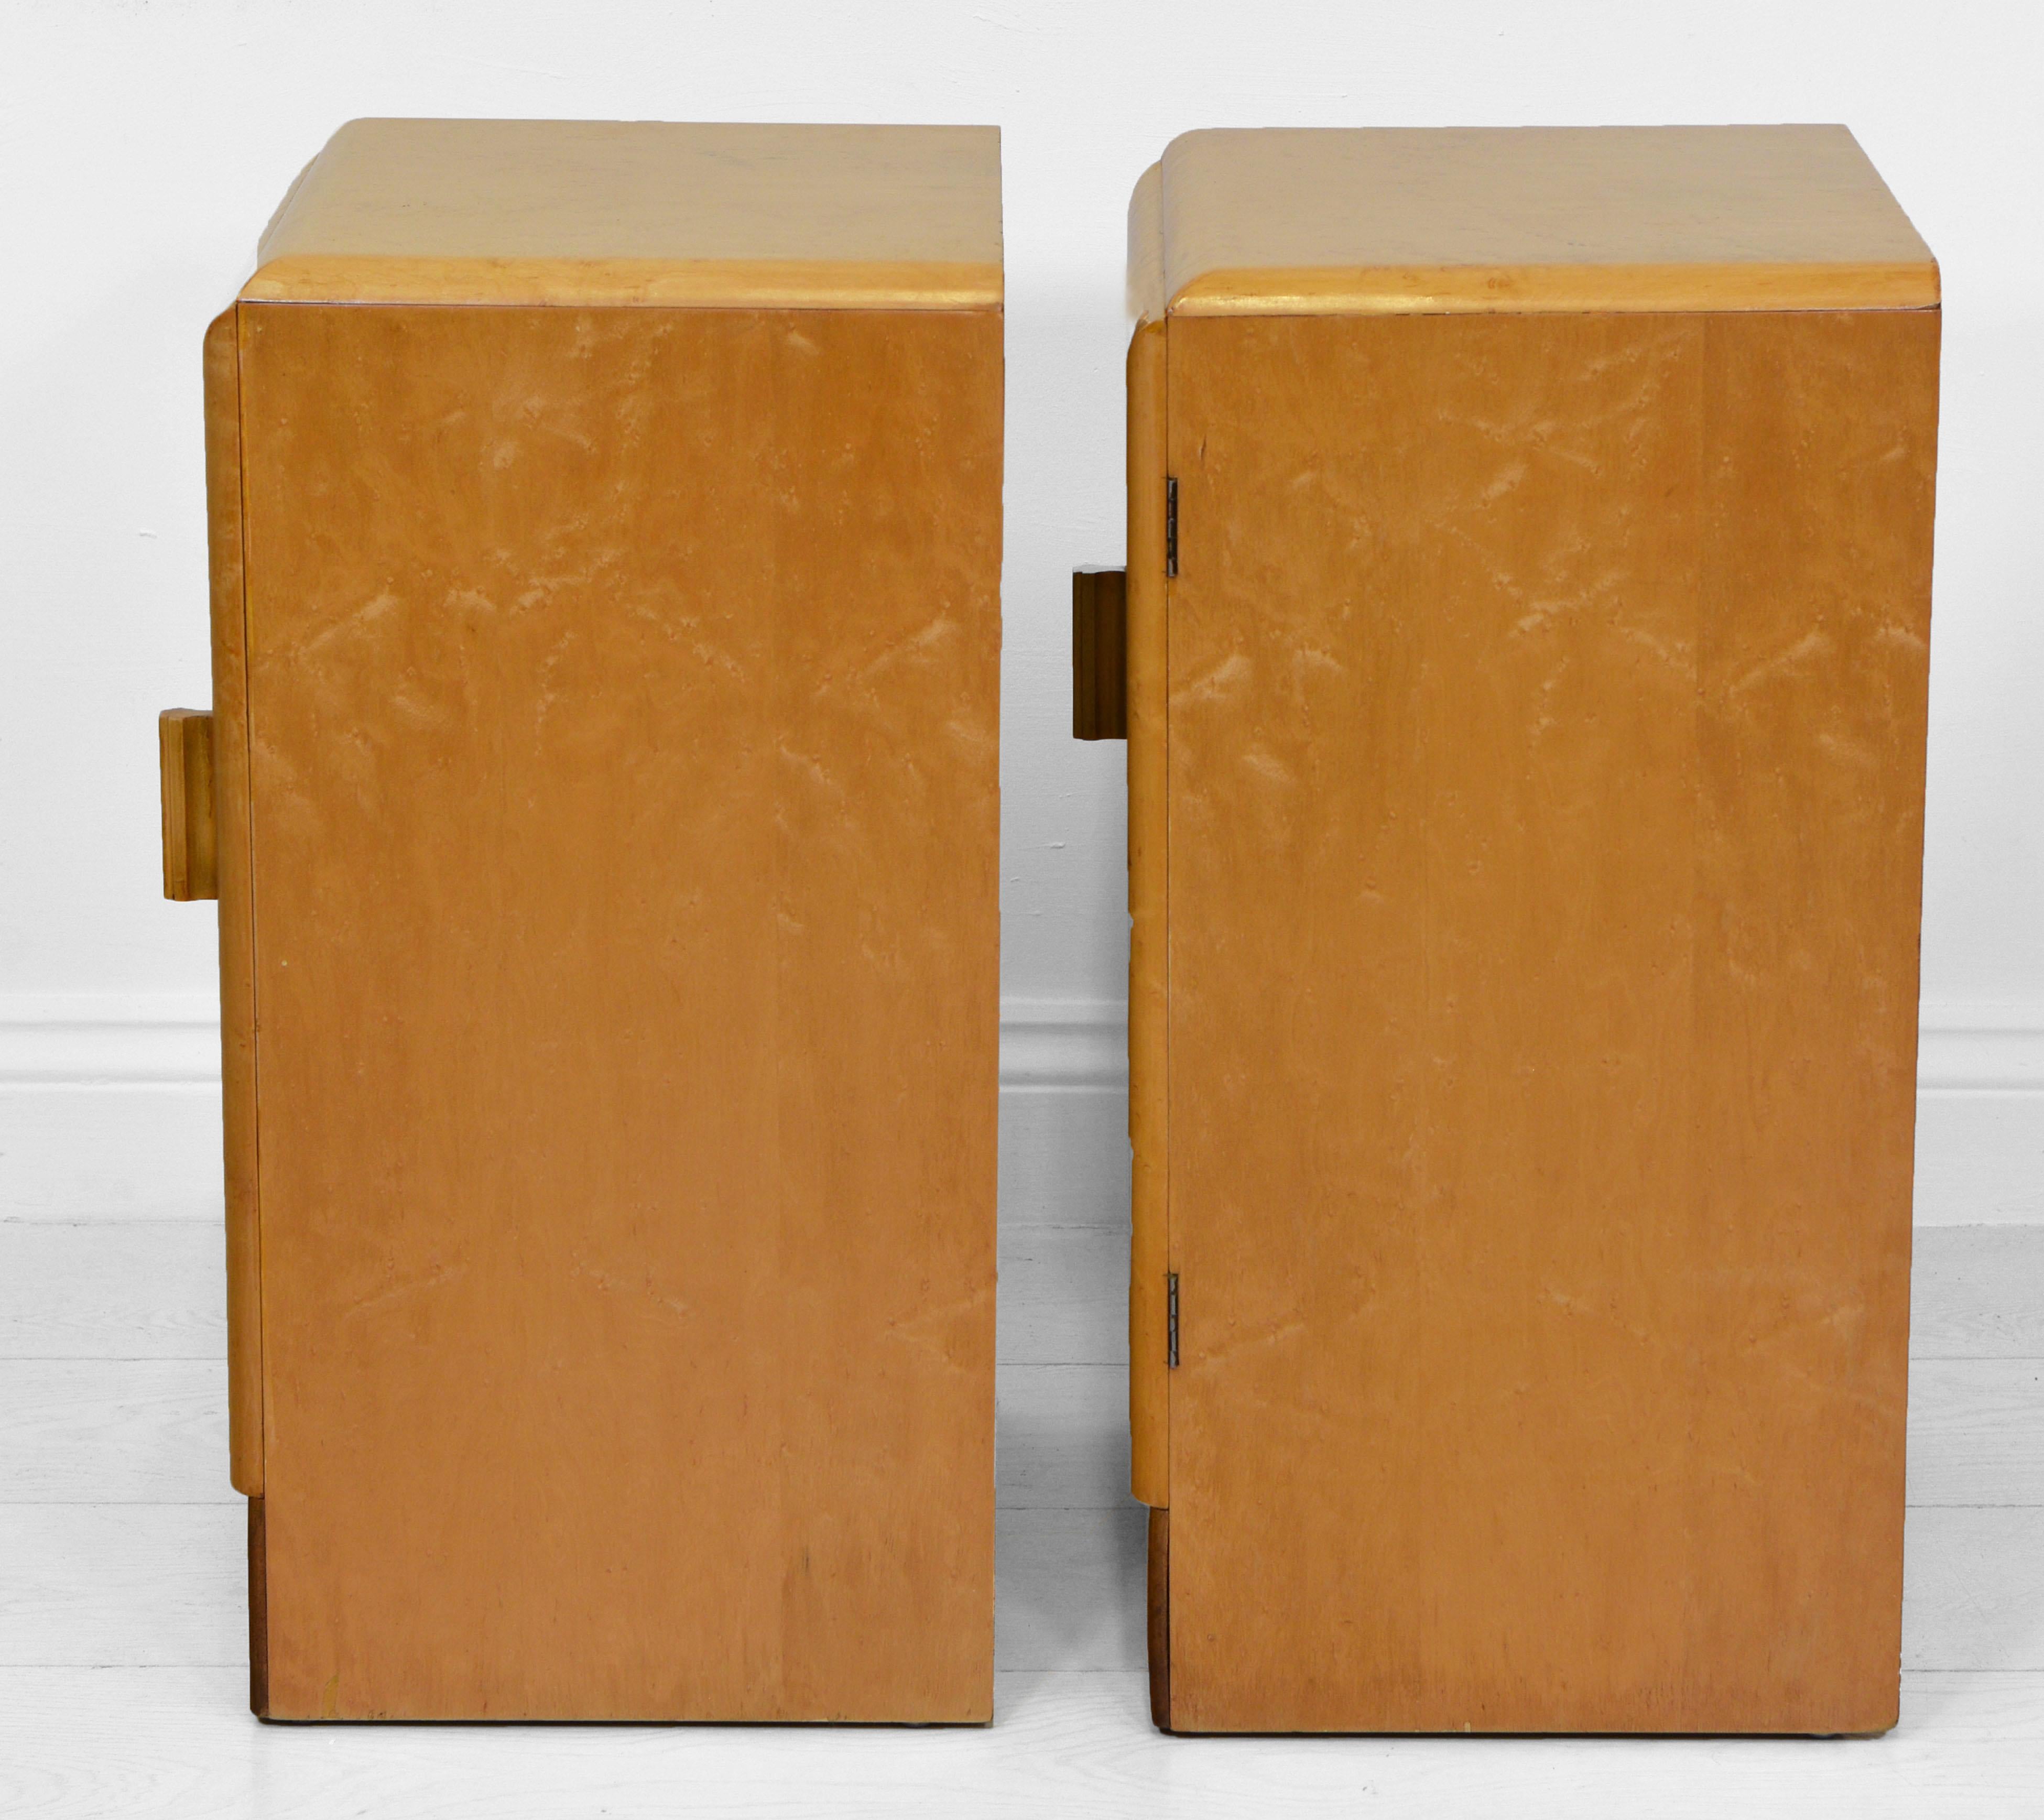 English Pair of Art Deco Bird's Eye Maple & Walnut Bedside Cabinets, 1930s For Sale